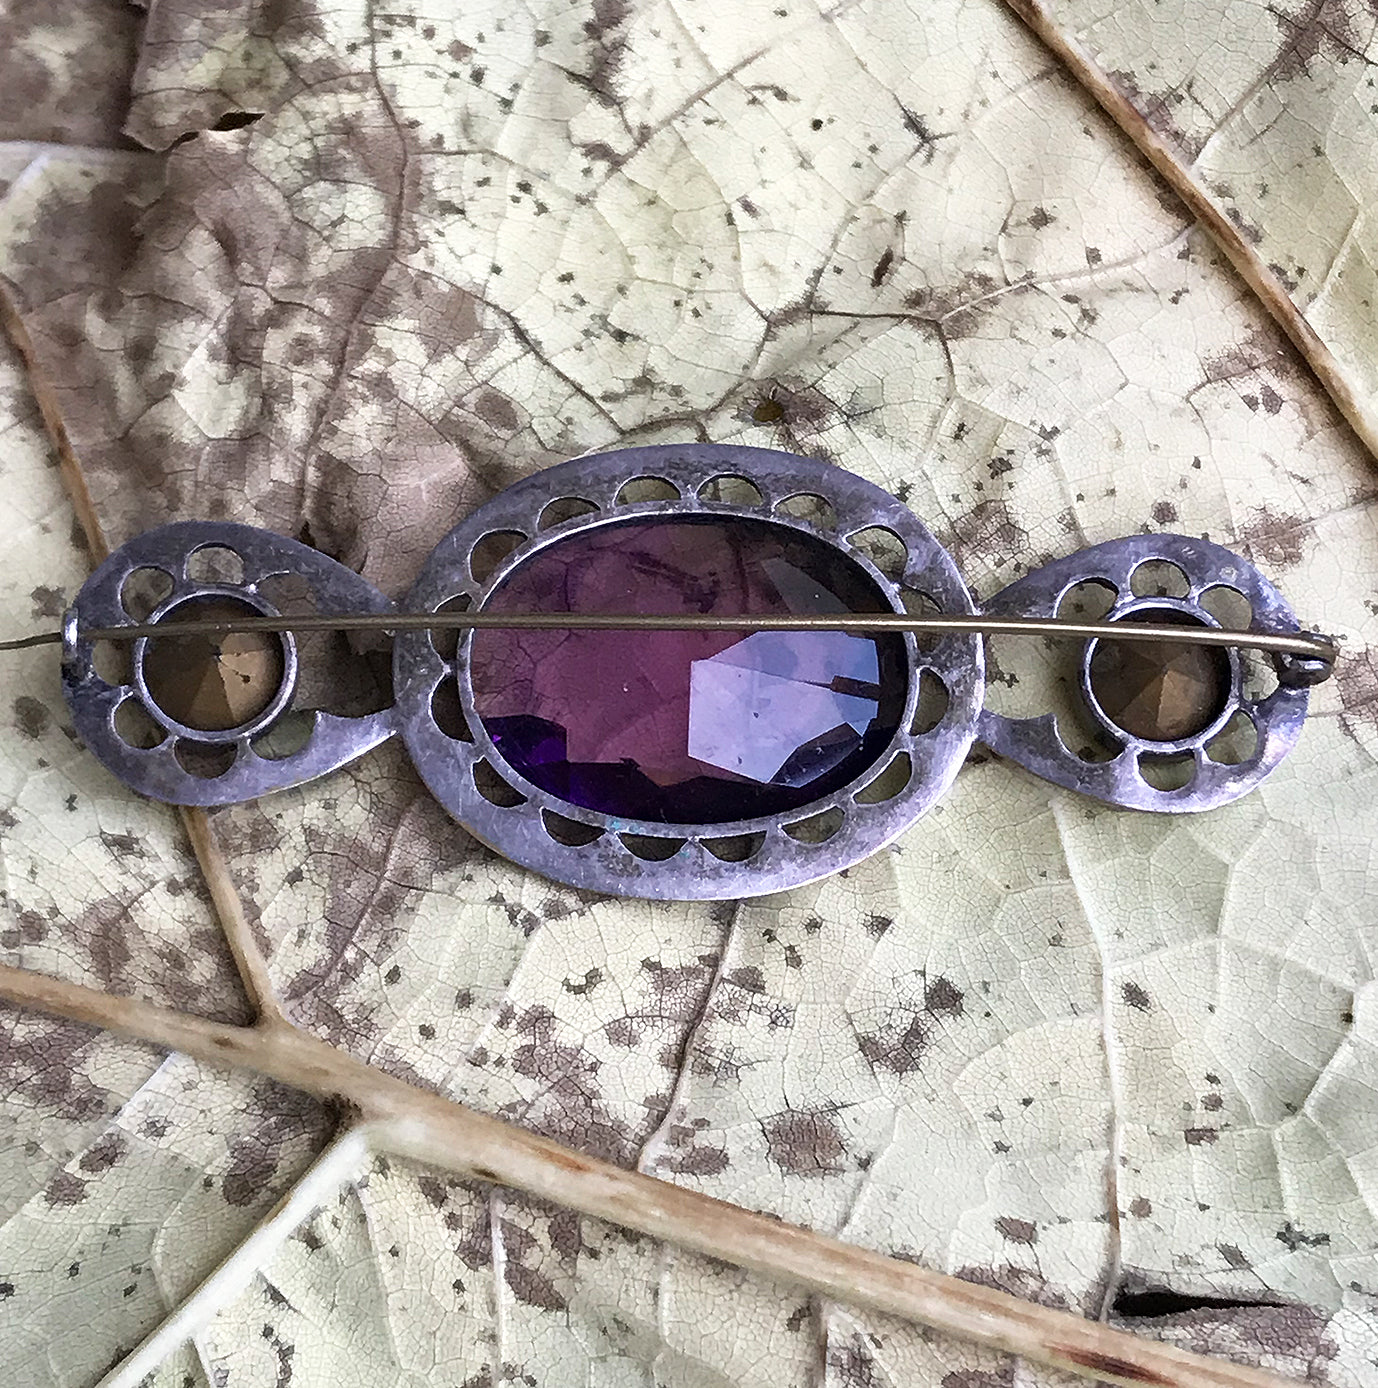 Beautiful quality Victorian brooch with a pale purple cut glass centre gem that is surrounded by a fabulous cut glass diamond studded border with two larger cut glass diamonds at each end - SHOP NOW - www.intovintage.co.uk